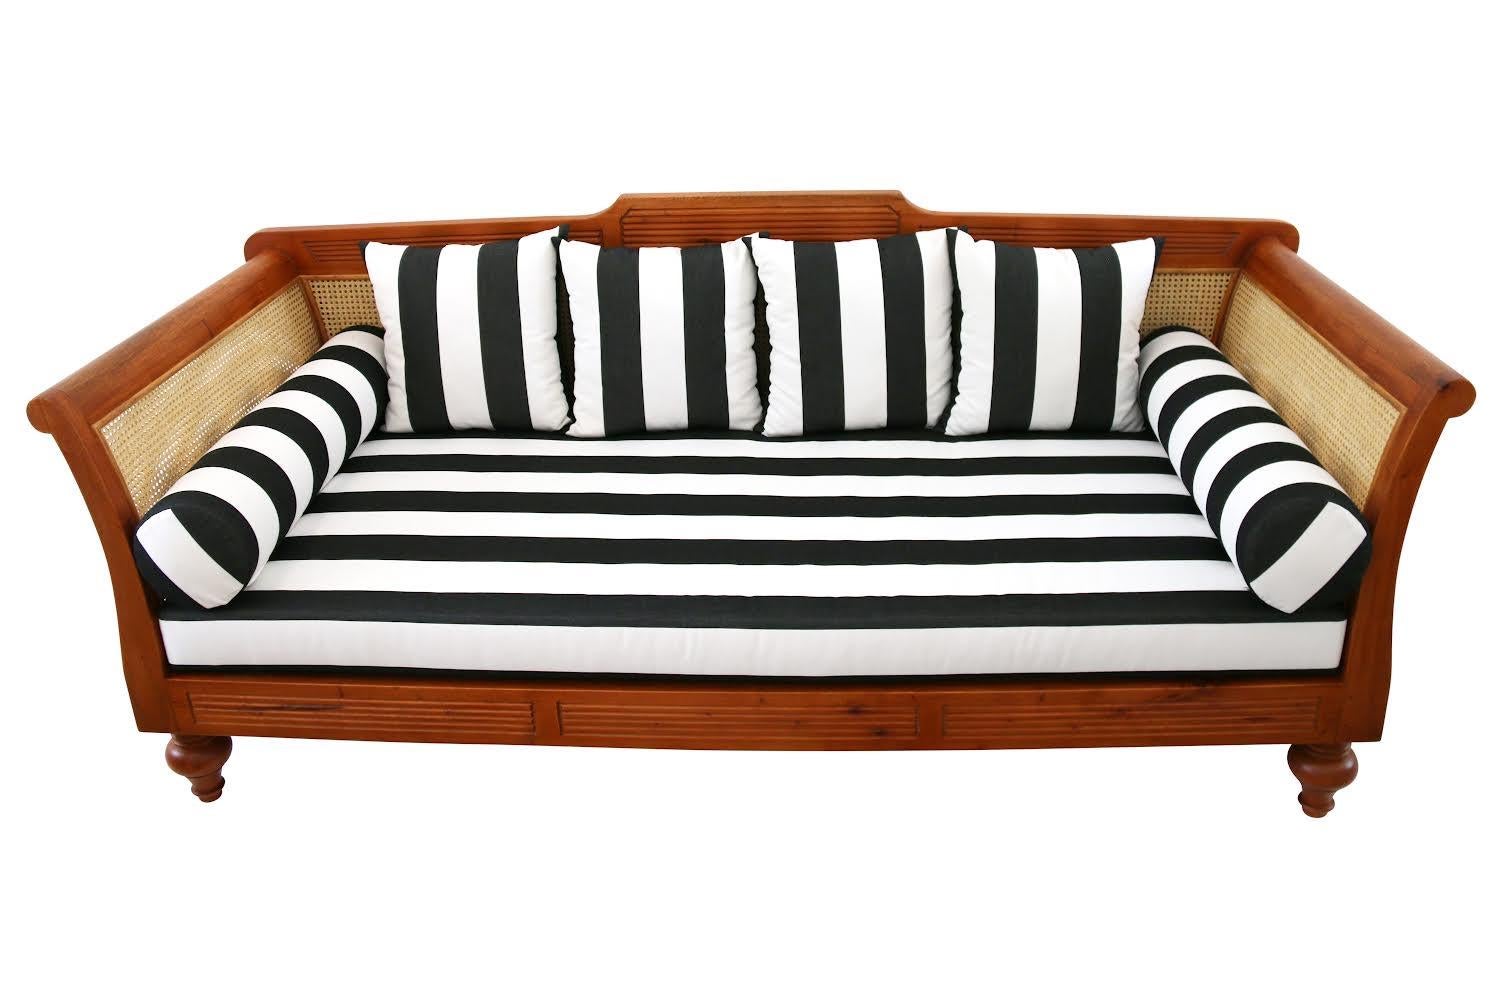 This is an early prototype of Nestify's classic, colonial style daybed. It has a tropical vibe that will bring romantic whimsy to your room. Made from sustainably sourced teak and natural hand woven cane (a fast growing, renewable resource), it also